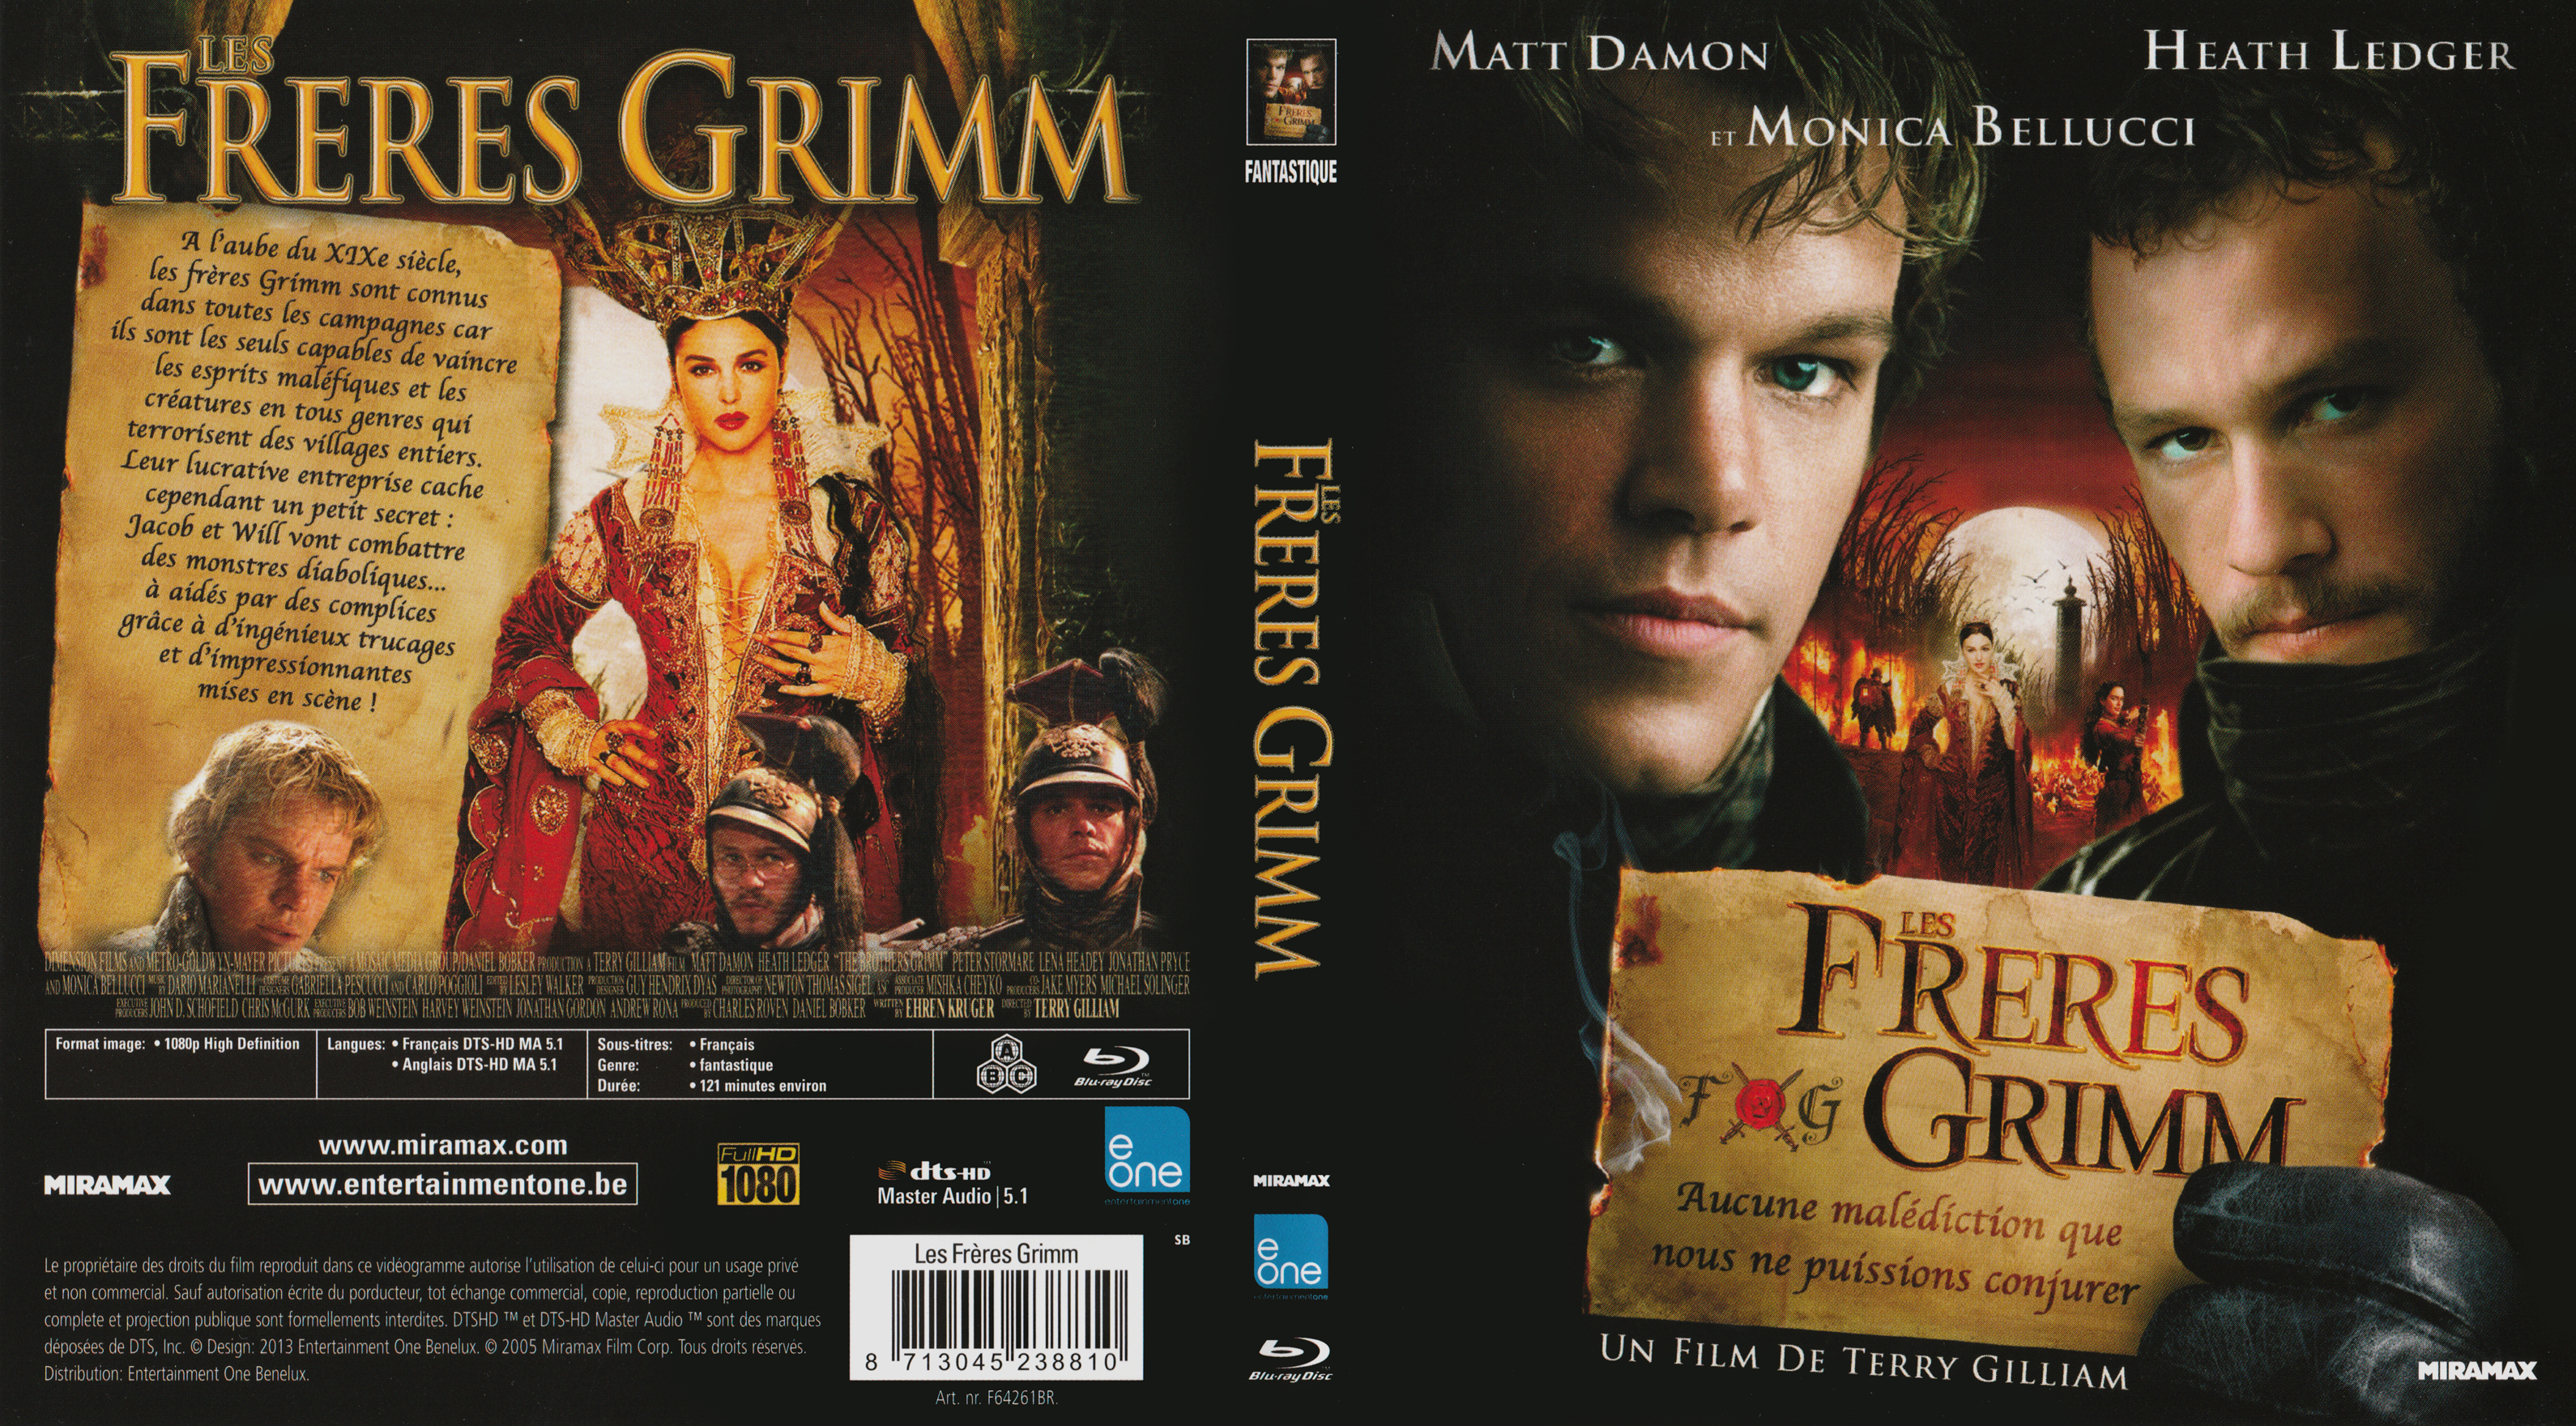 Jaquette DVD Les freres Grimm (BLU-RAY) v2